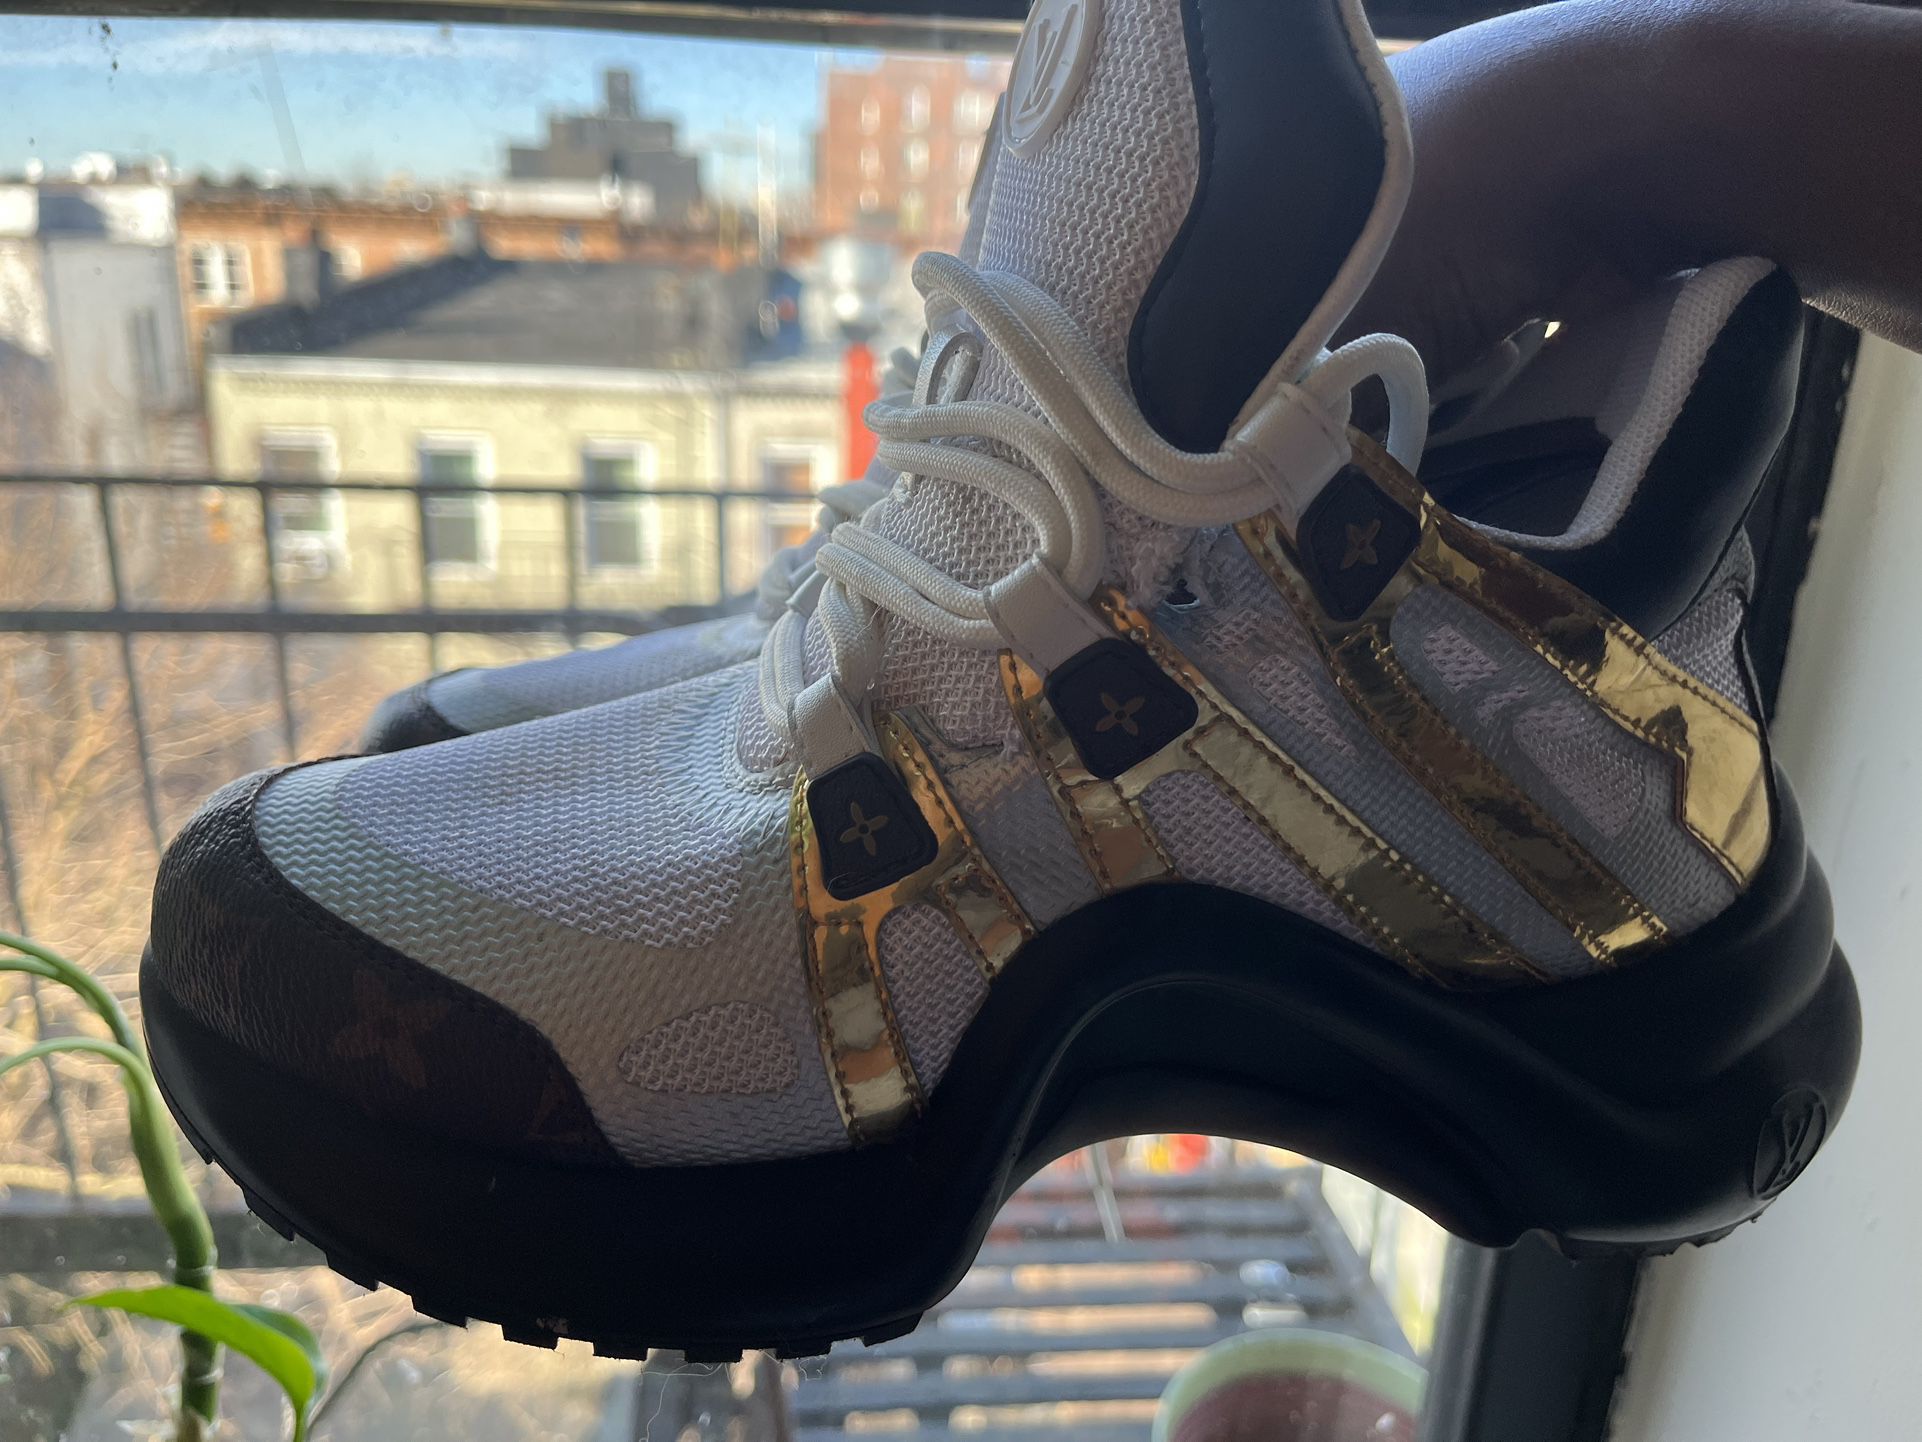 Lv Louis Vuitton Sneakers for Sale in Brooklyn, NY - OfferUp